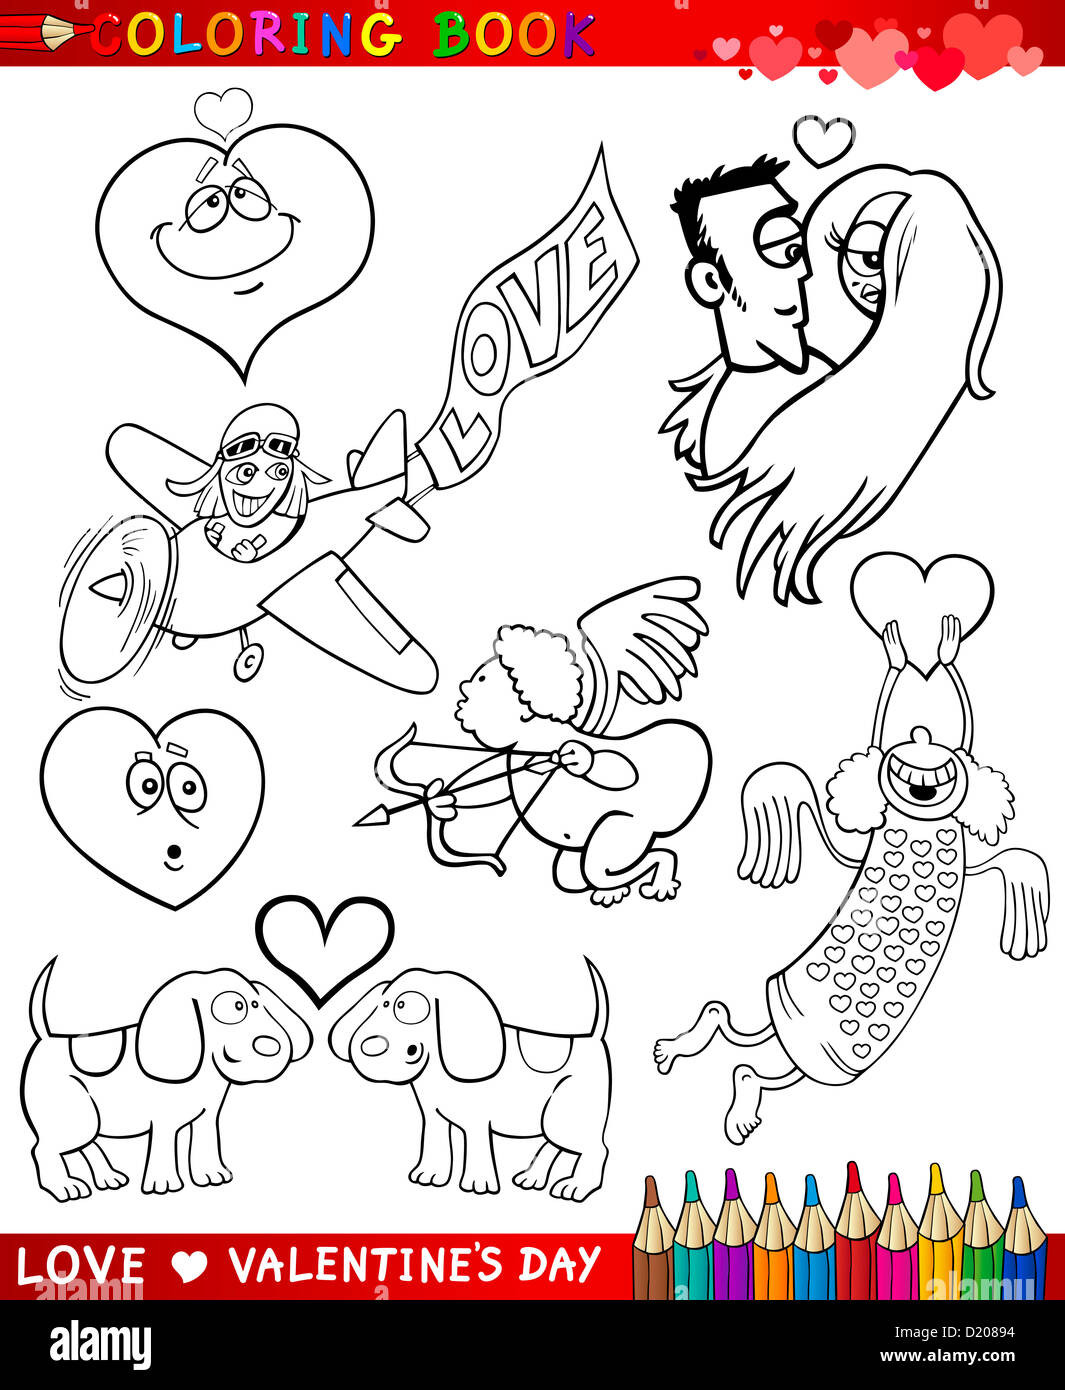 Valentine's Day and Love Themes Collection Set of Black and White Cartoon Illustrations for Coloring Book Stock Photo